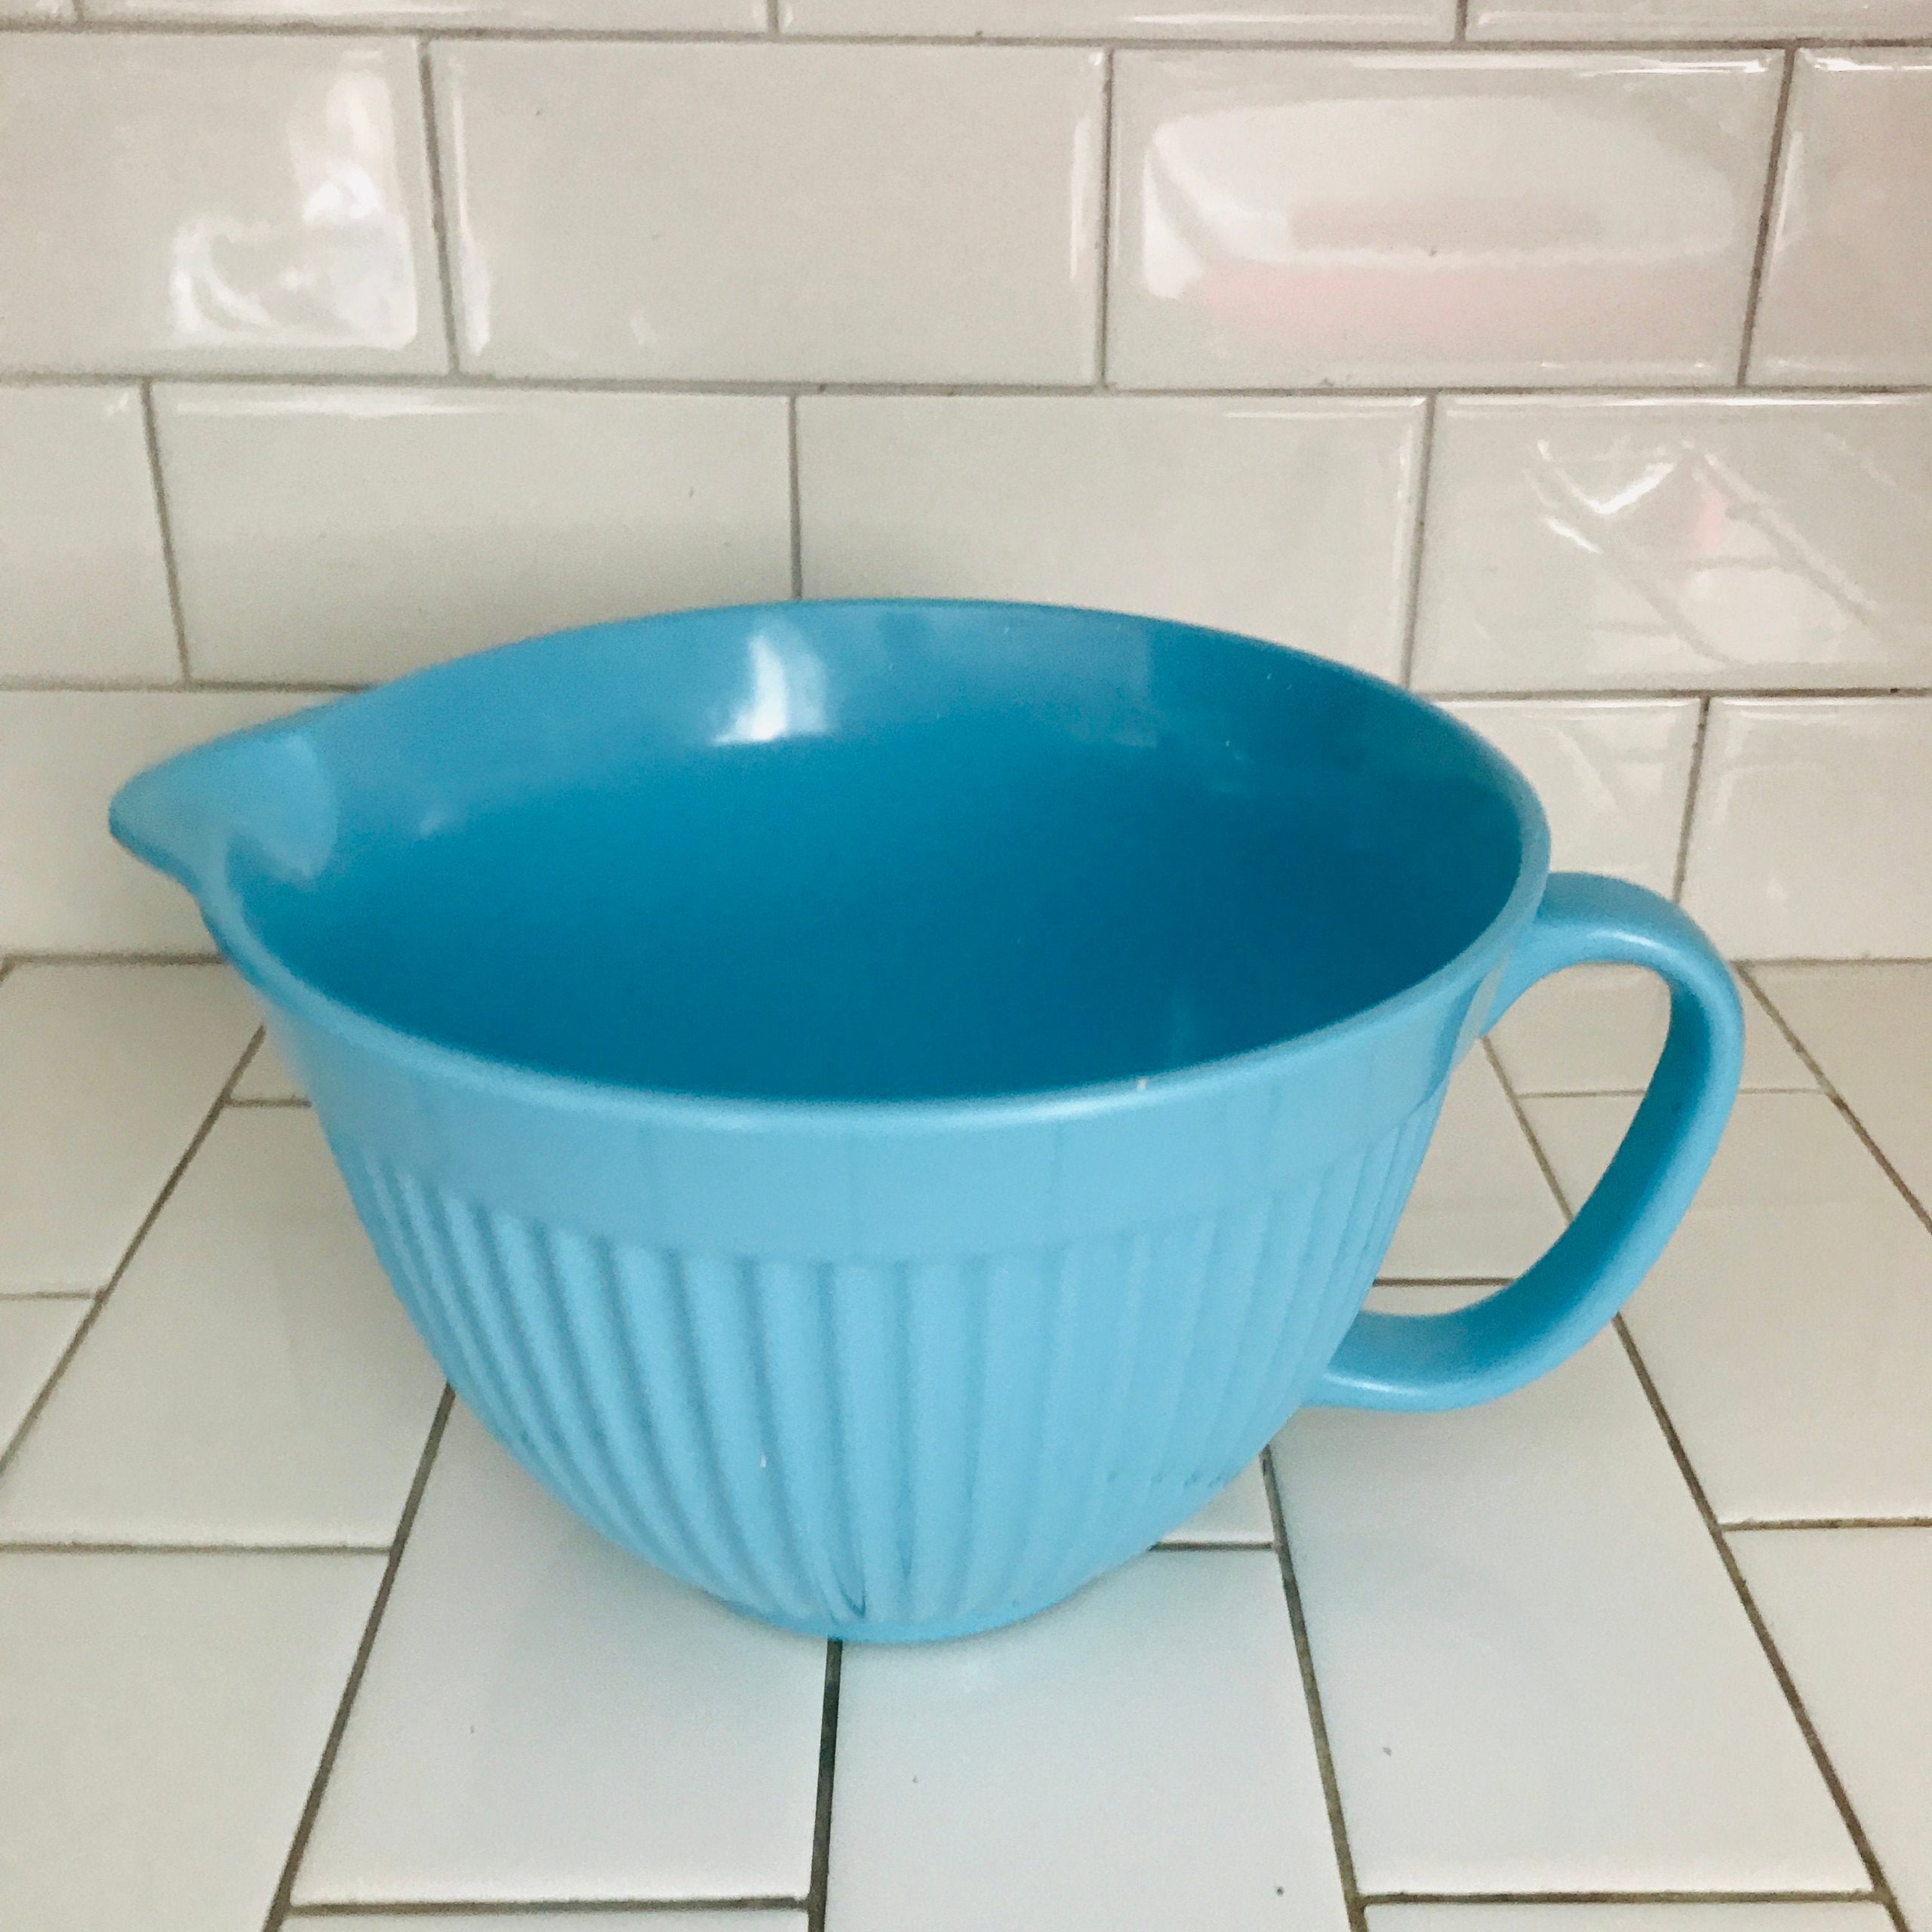 Vintage Melamine Bowl With Pour Spout Mixing Bowl Collectible Display Kitchen Decor Non Slip Base Ribbed With Handle 5f1cb6d01 Scaled 